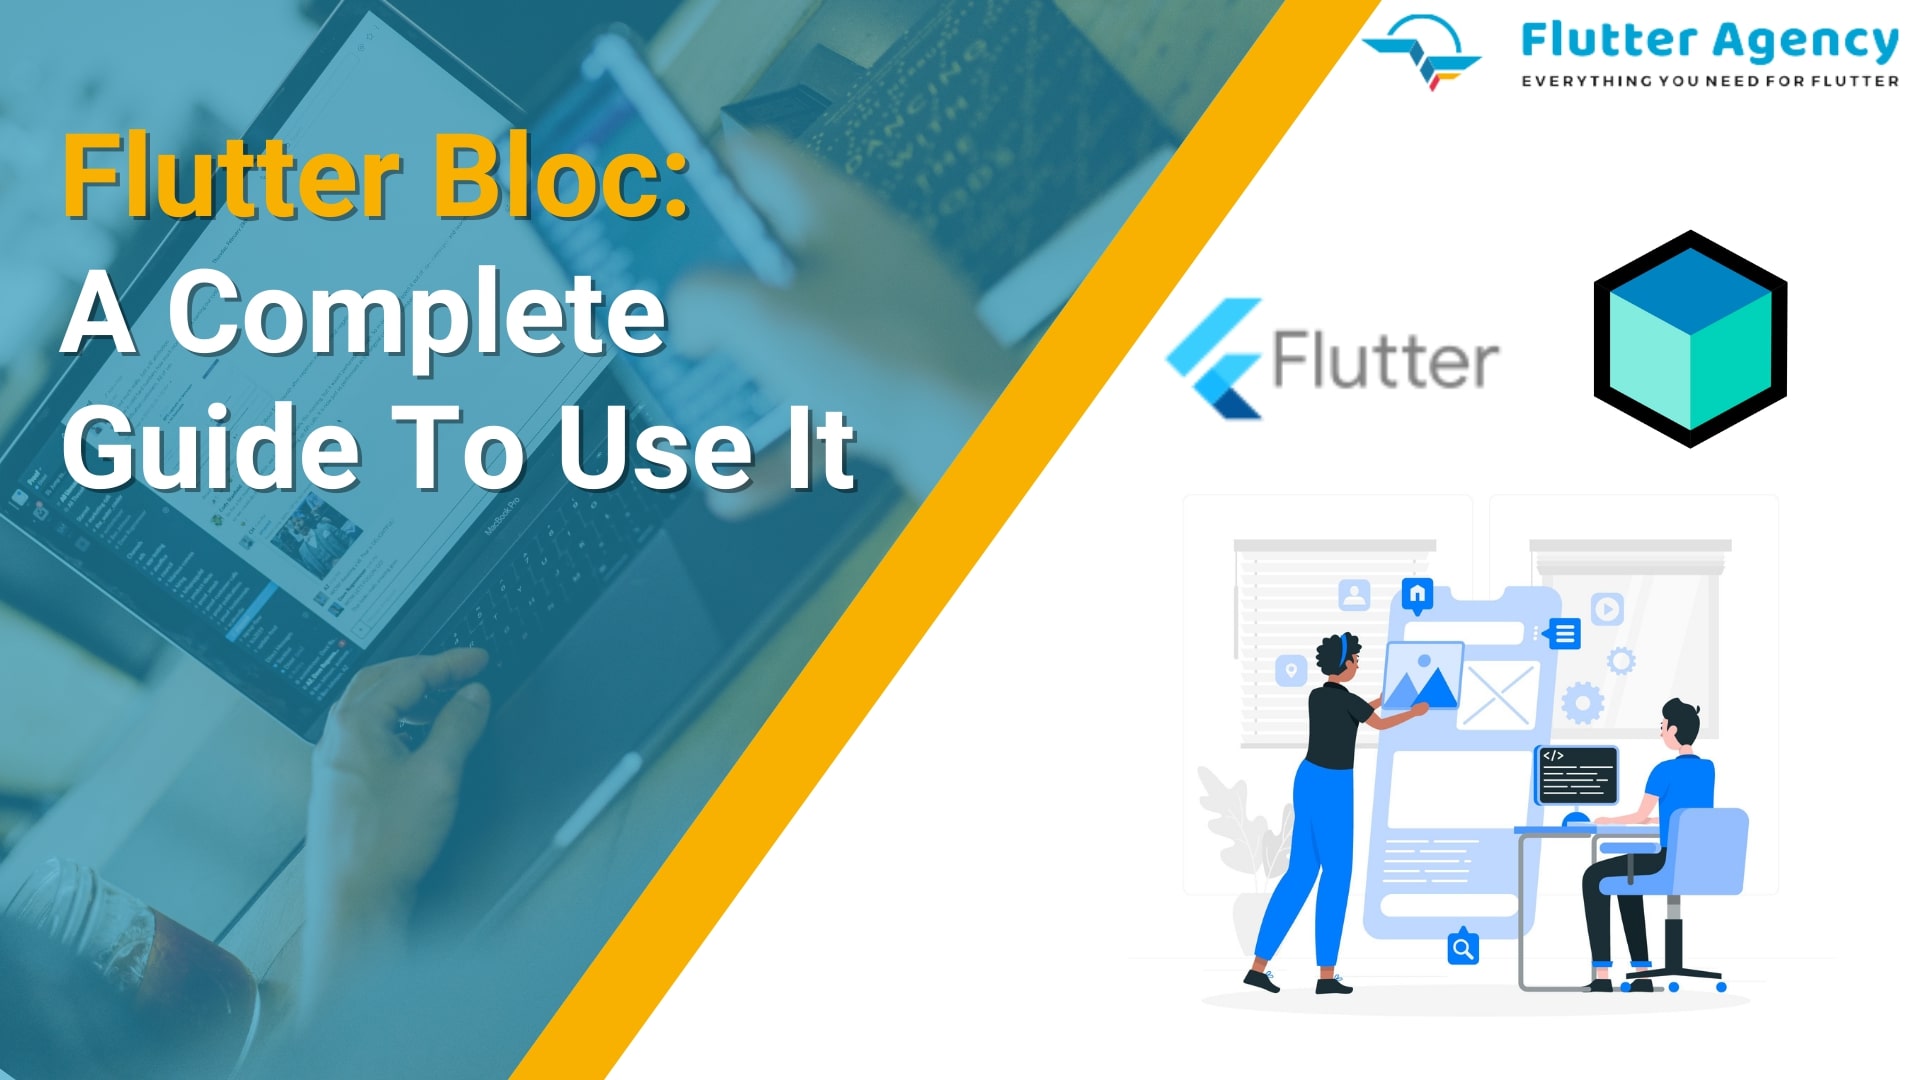 What is Flutter Bloc and how to use it?